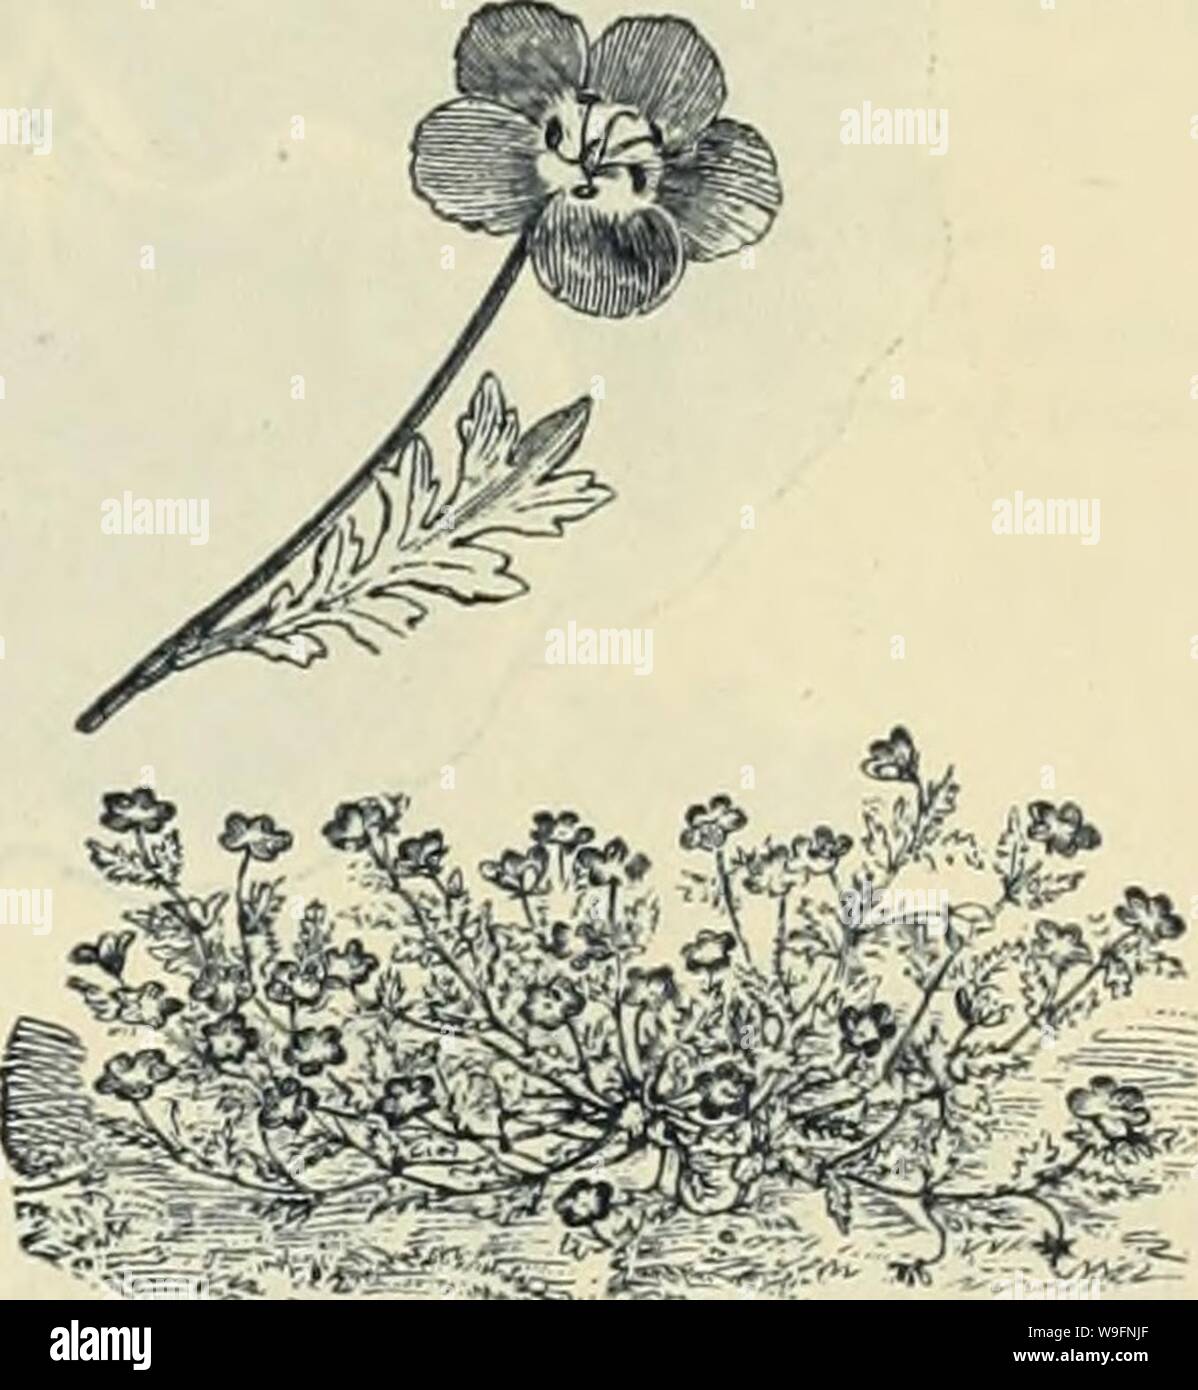 Archive image from page 58 of Currie Bros' horticultural guide . Currie Bros.' horticultural guide : spring 1888  curriebroshortic1888curr Year: 1888 ( NASTURTIUM. These will always be valuable summer flowering plants. They stand any amount of heat and drought. They flower better, however. In a poor, rocky soil, as a rich one has a tendency to make them ' run to leaf ' Hardy annuals. TaU Crimson—10 feet 5 ' Yellow—10 feet 6 NEMOPHILA. Pretty, dwarf-pro ing plants of compact habit, pro- ducing an abundance of beautiful flowers through- out the summer months, llaidy annuals. Discoldalis—Black, Stock Photo